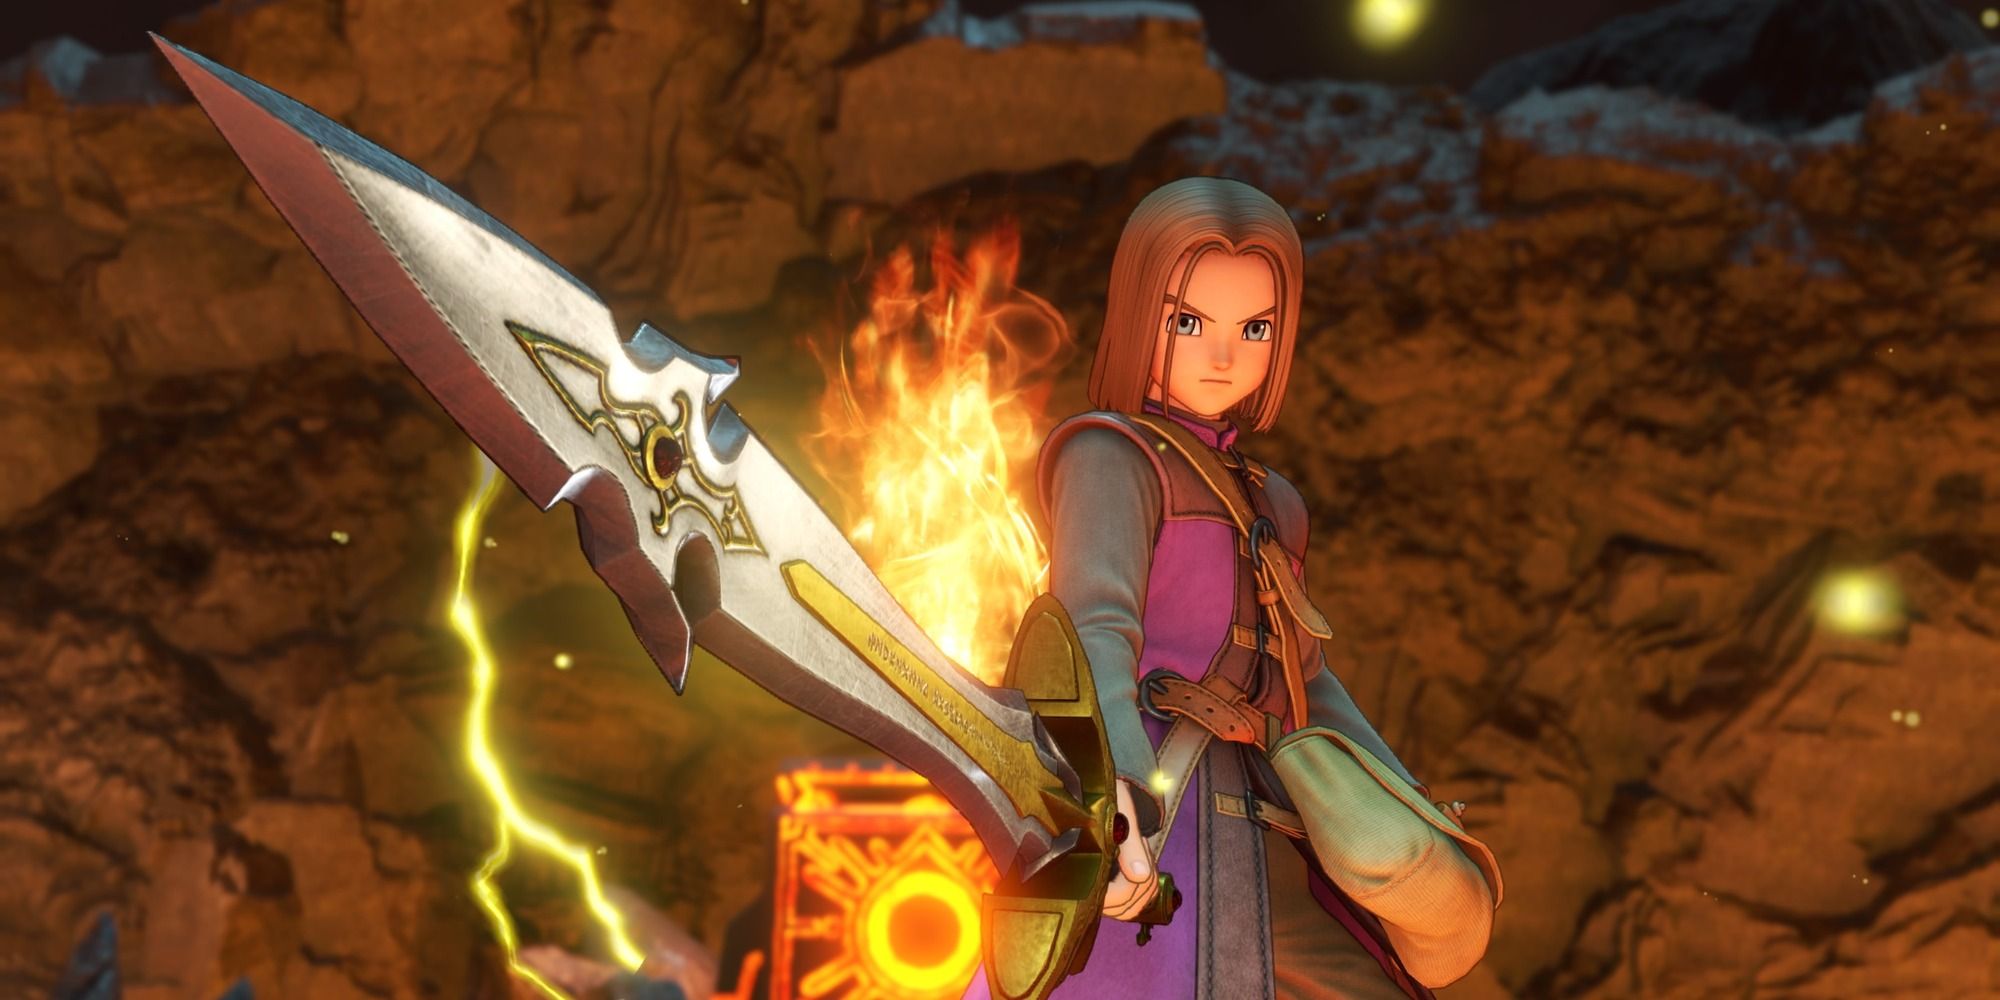 Dragon Quest XI 11 S Echoes of an Elusive Age Luminary hero holding the Sword of Light Kings in the volcano